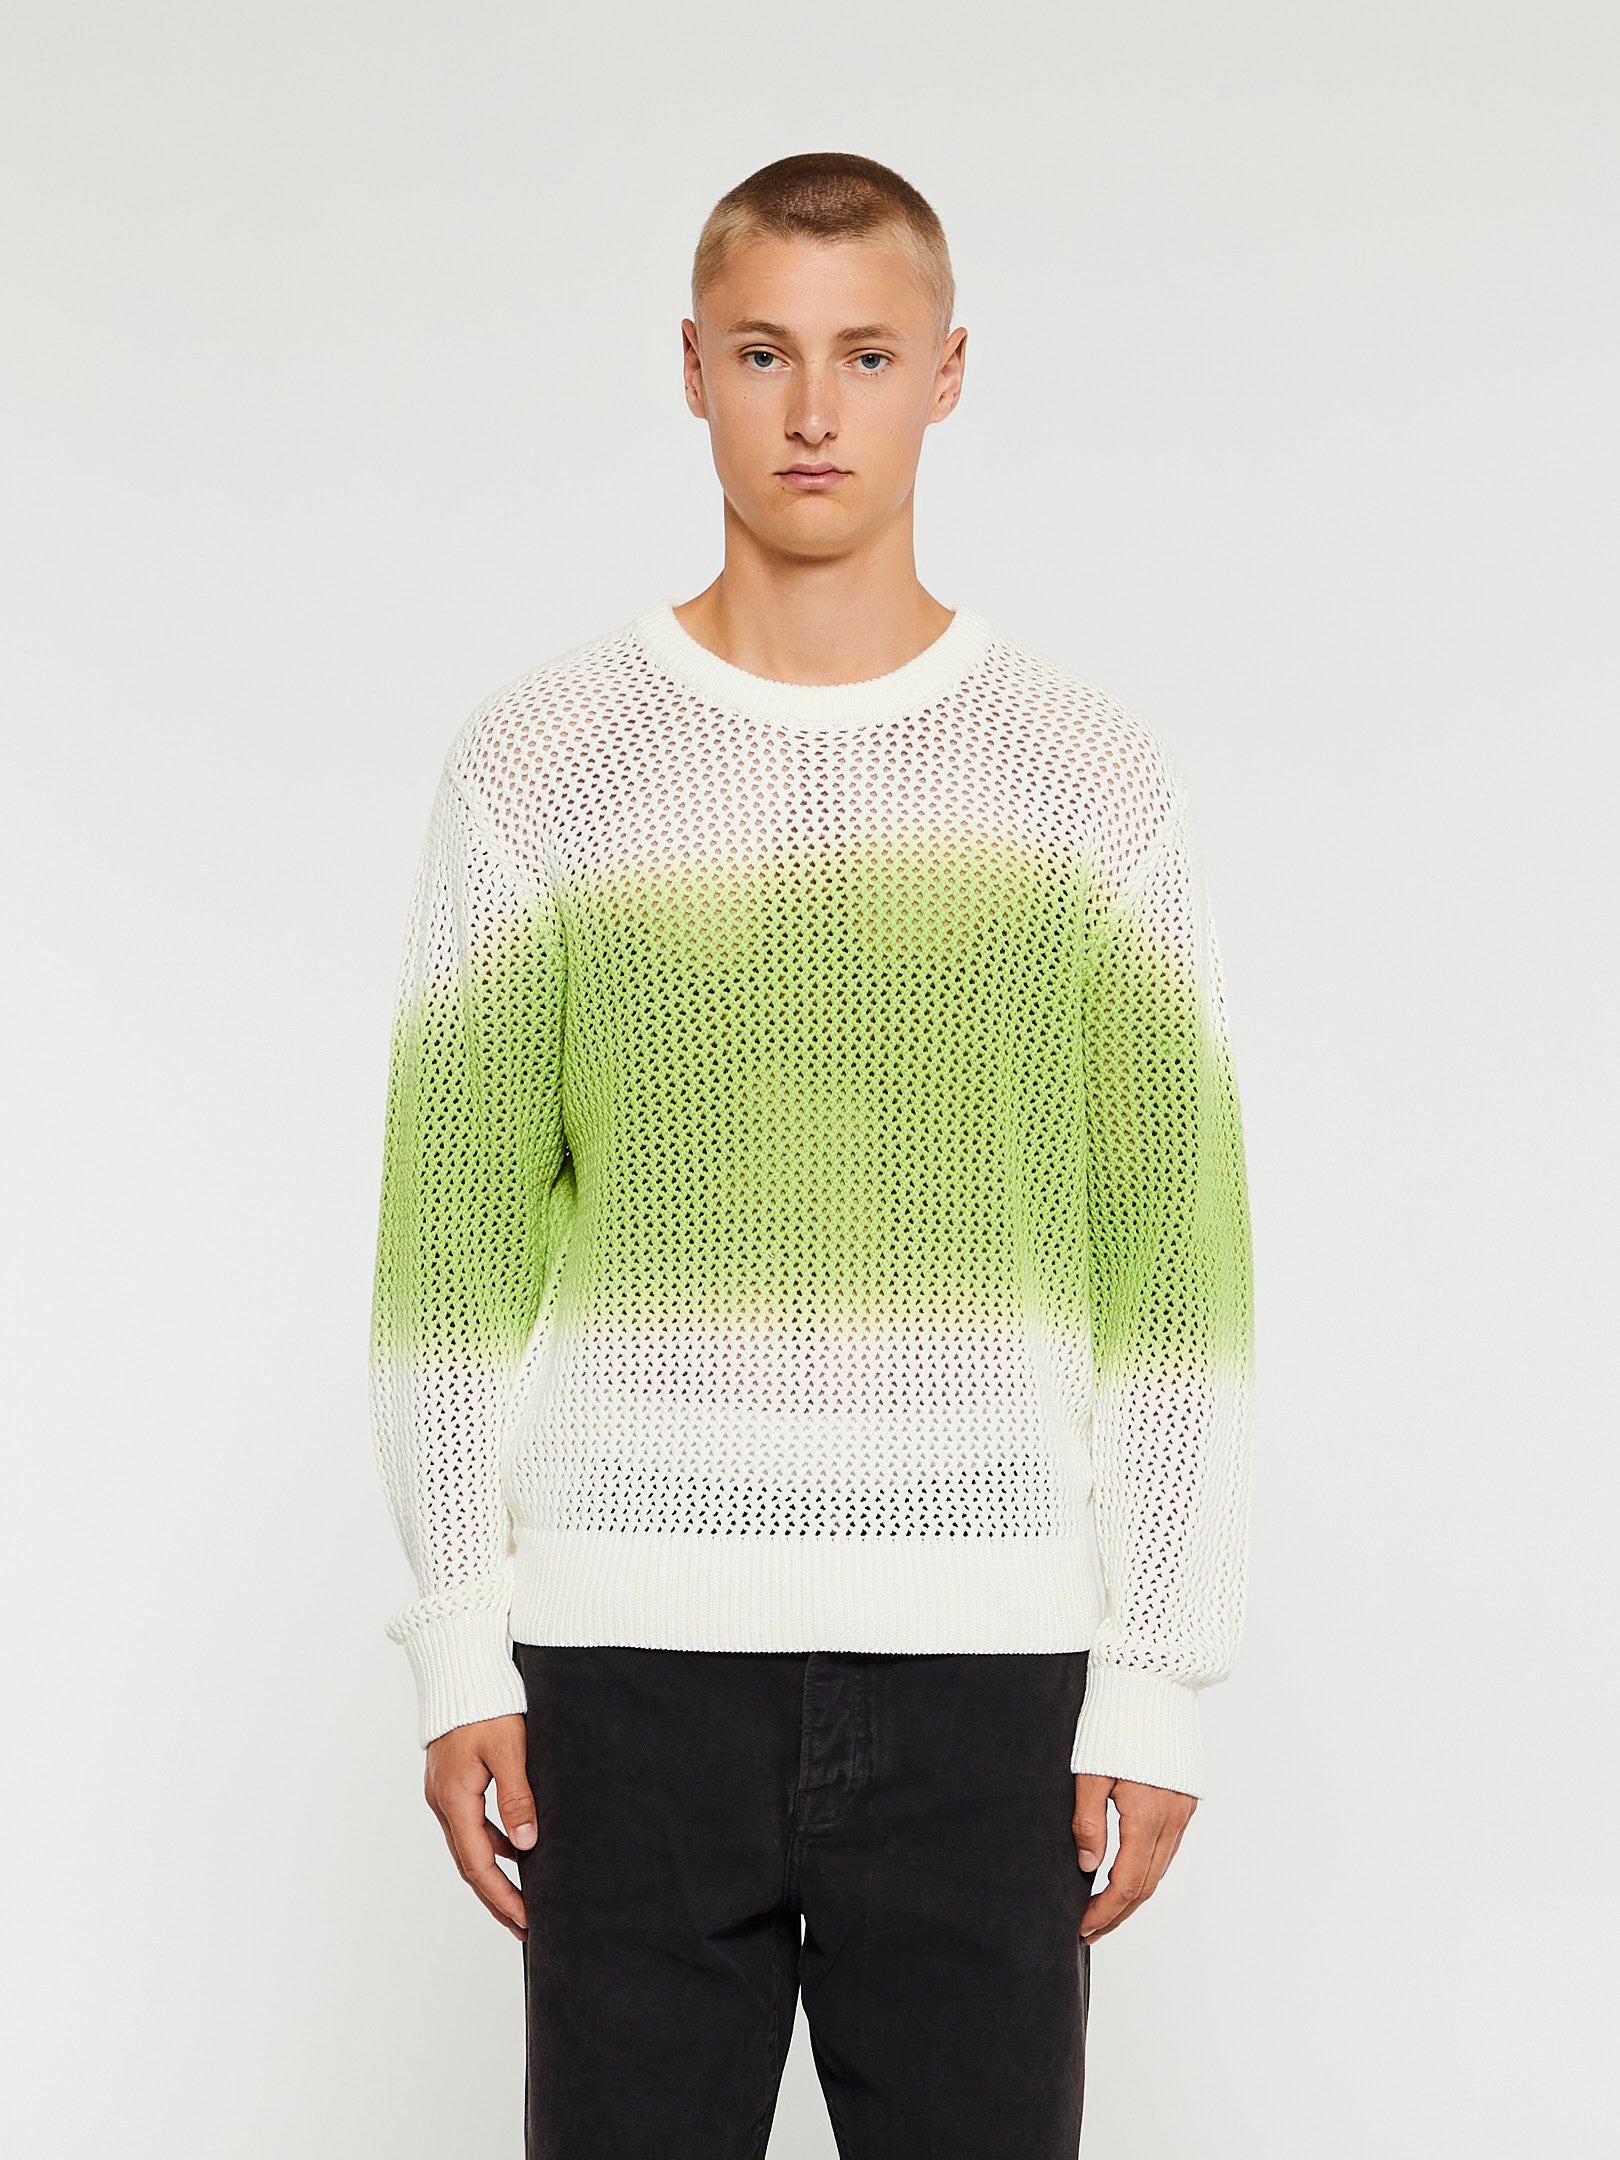 Stüssy - Pigment Dyed Loose Gauge Sweater in Bright Green